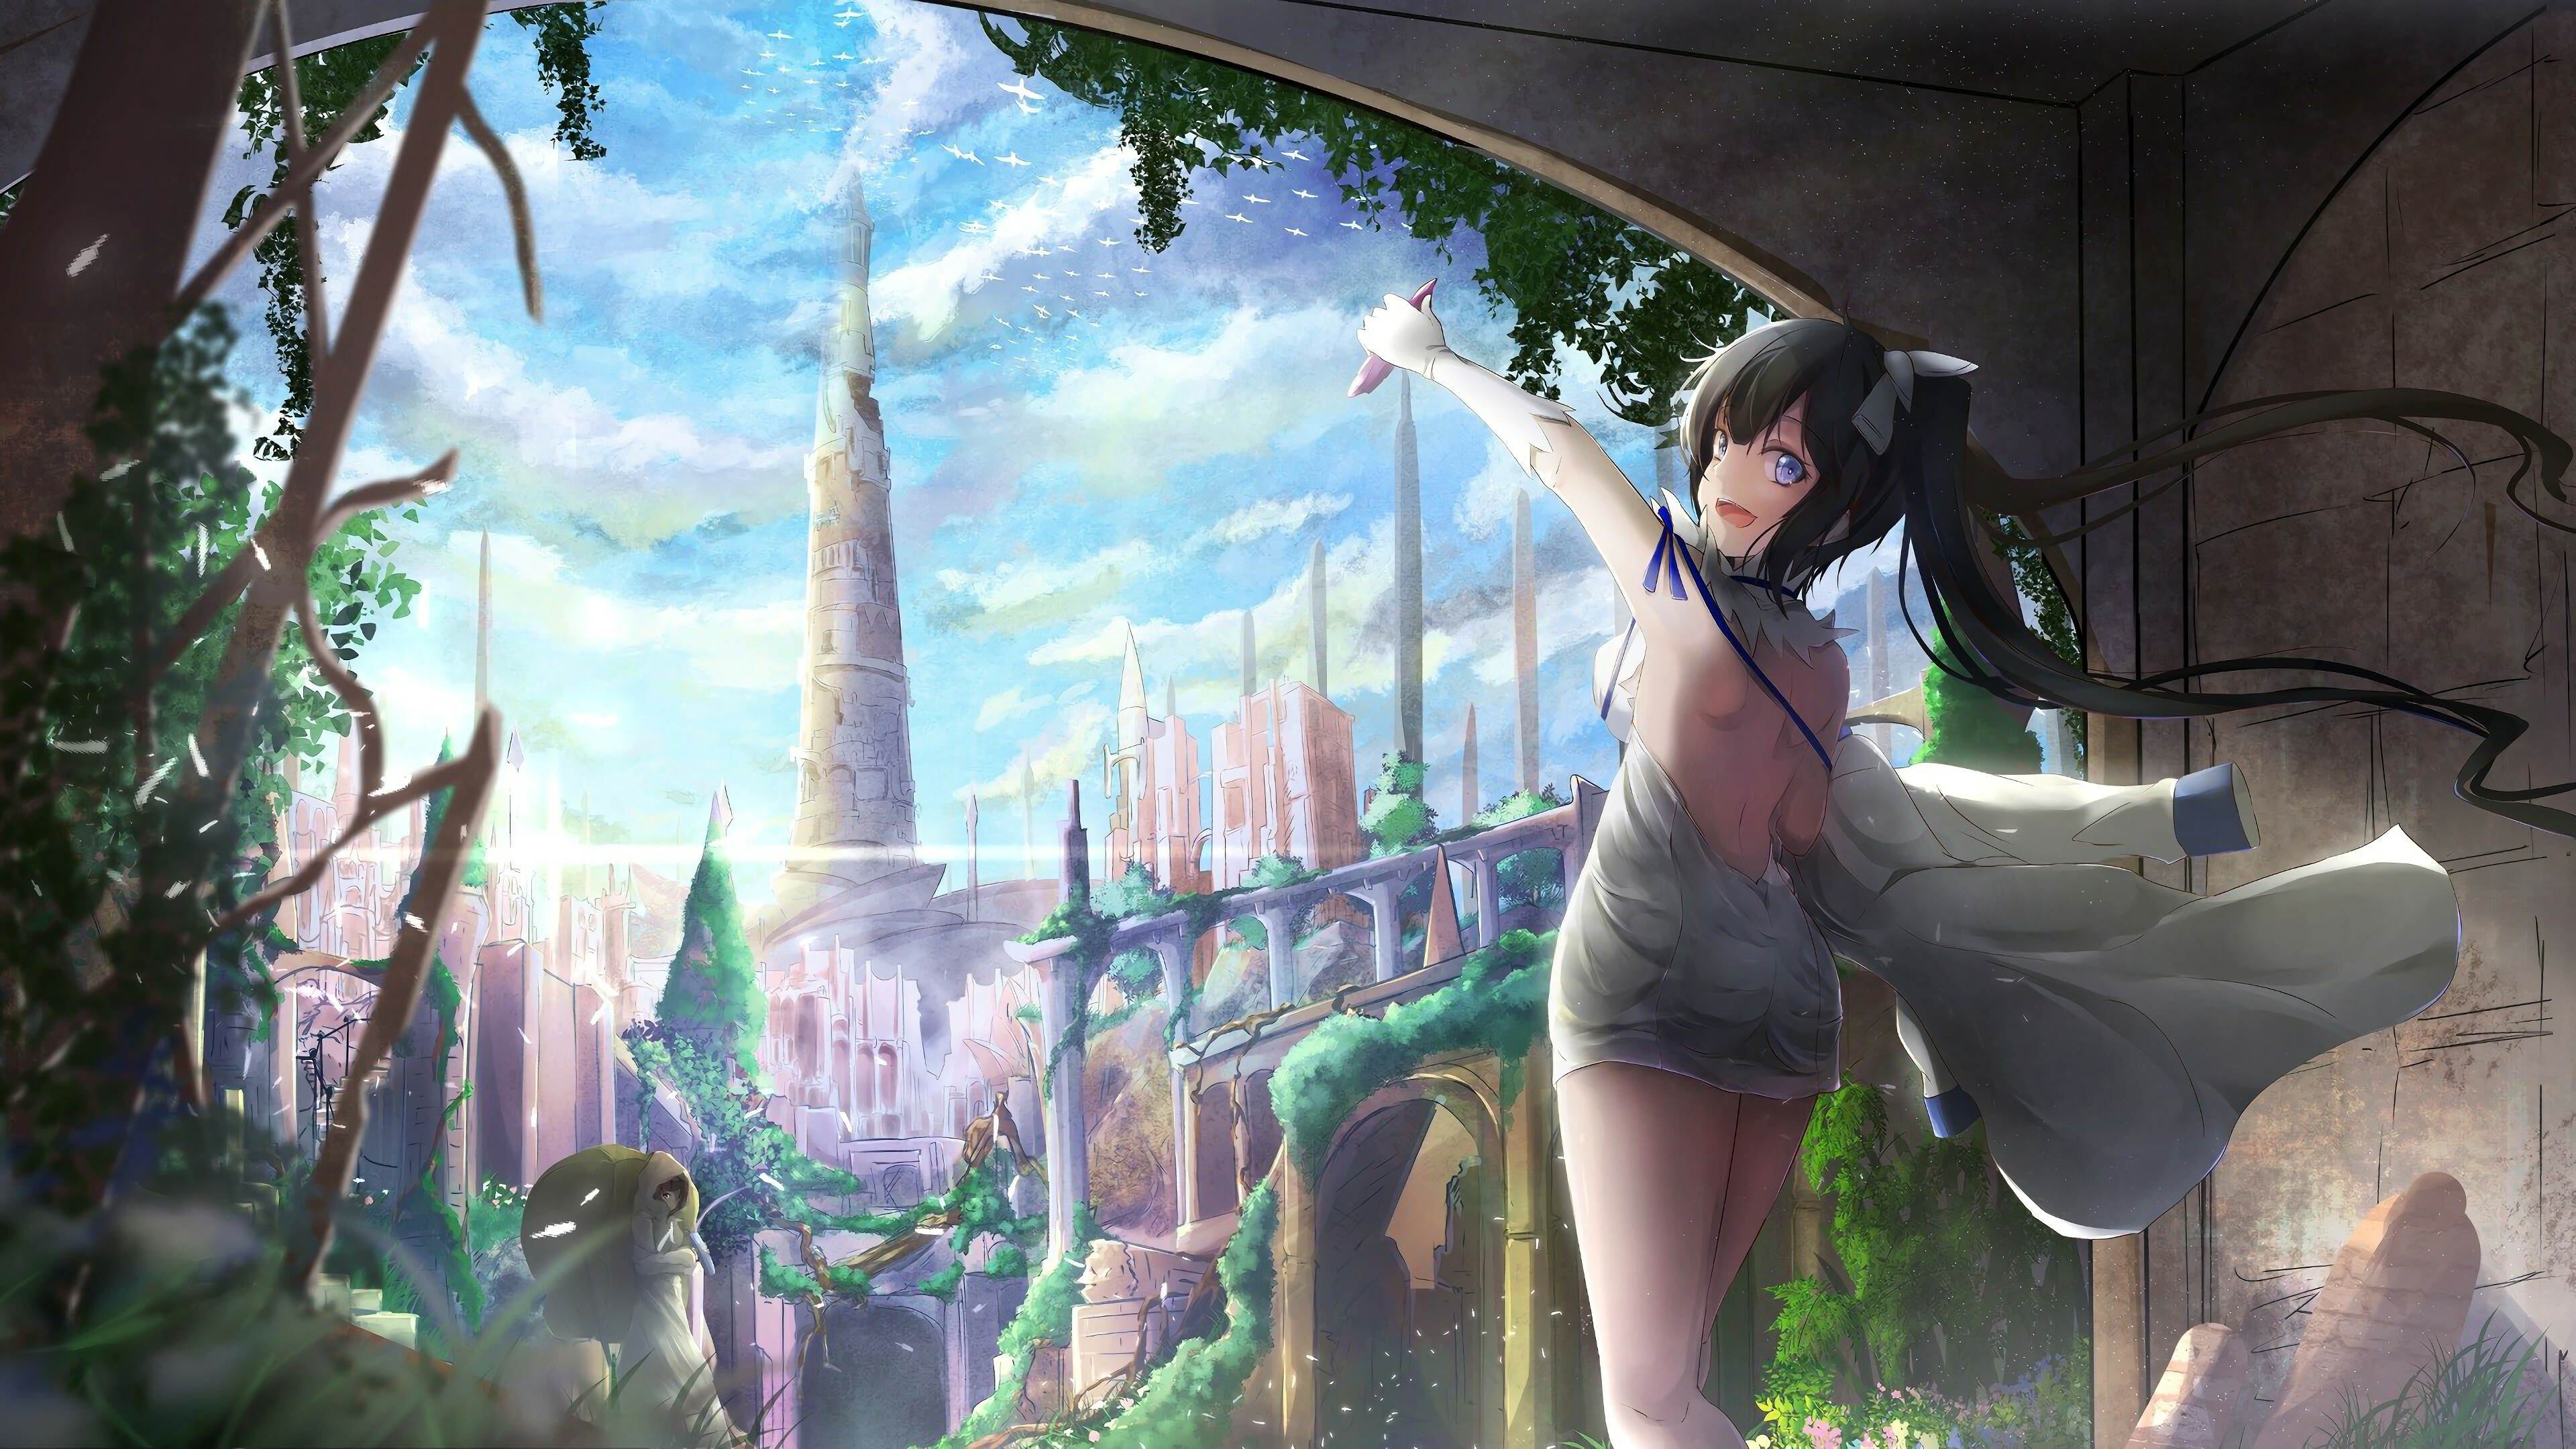 Is It Wrong to Try to Pick Up Girls in a Dungeon?: Hestia, The Goddess of Hearth, Manga. 3840x2160 4K Wallpaper.